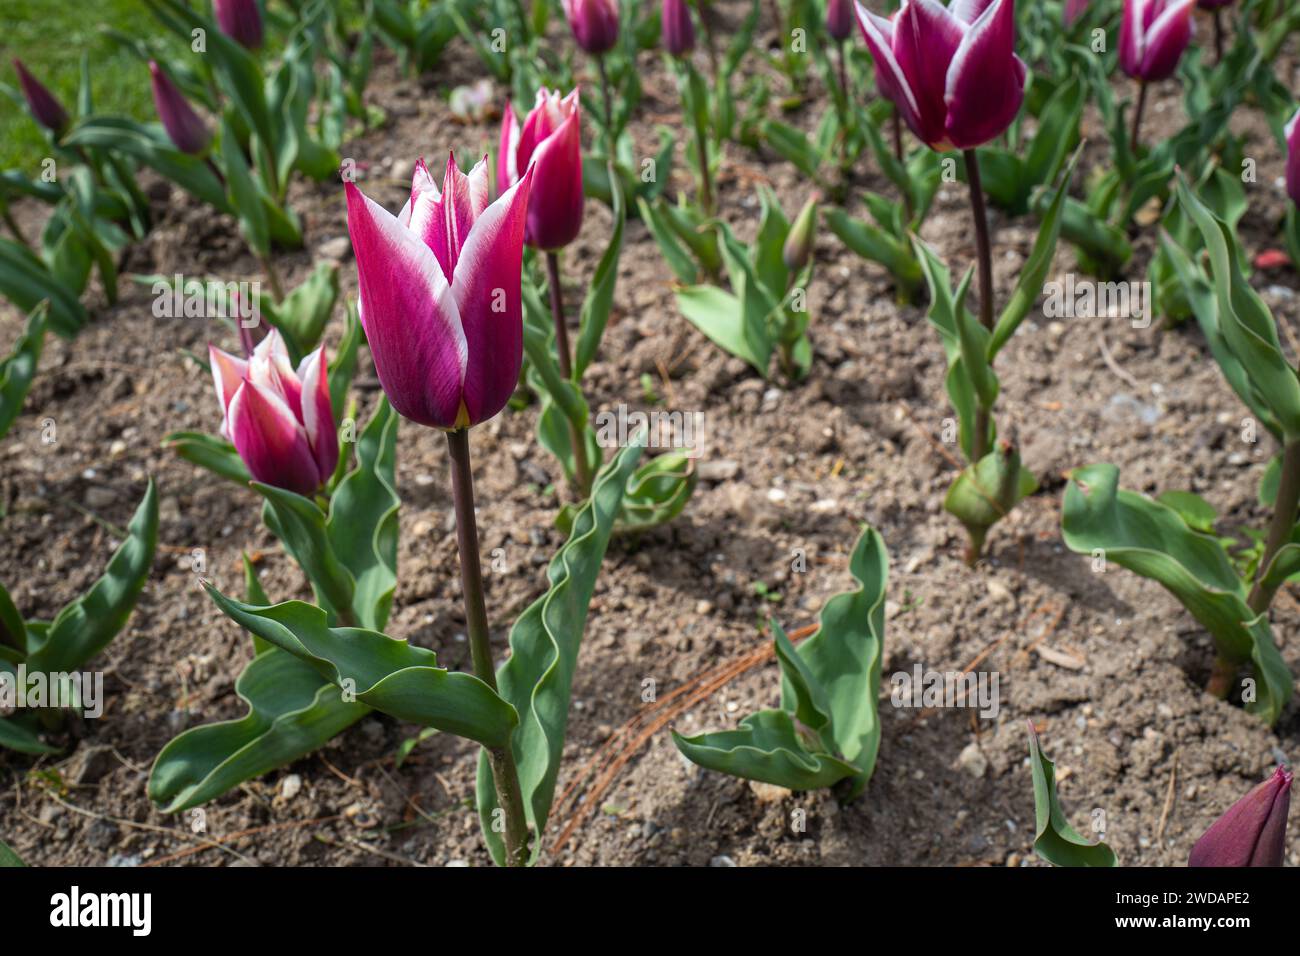 Colorful tulips in a garden, standing out from the rest of the field Stock Photo